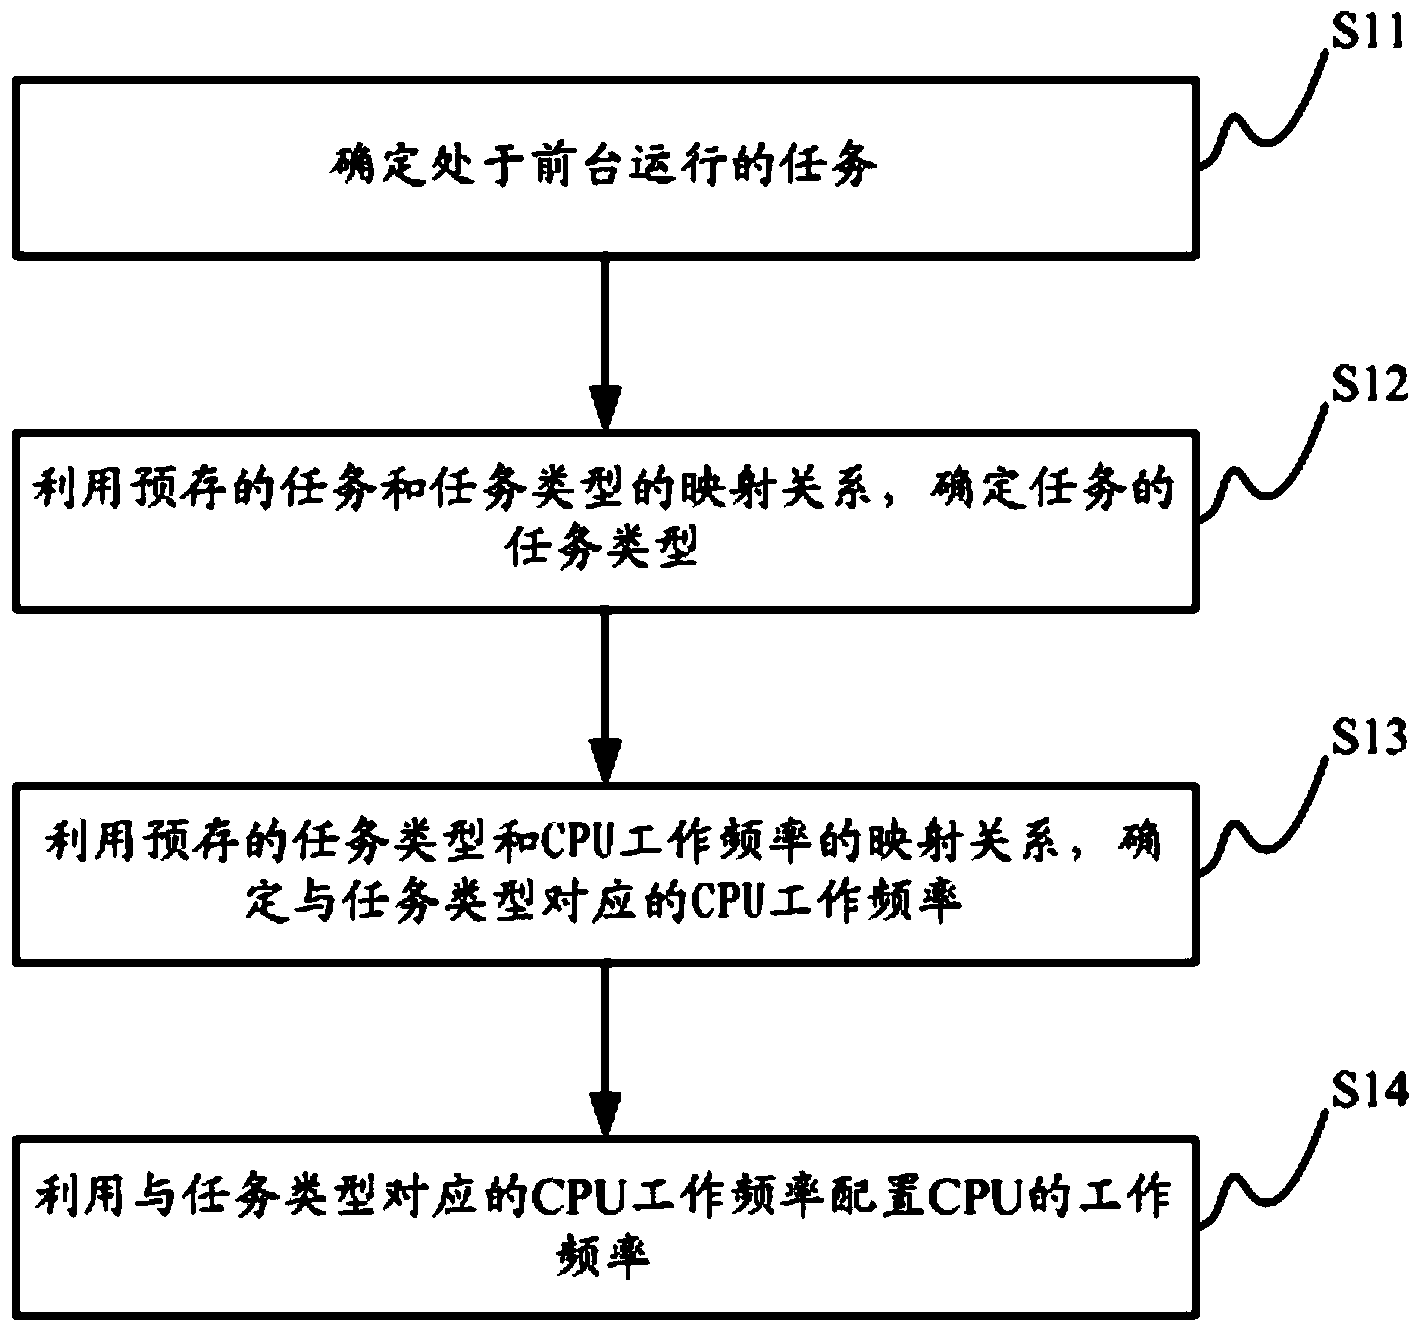 Method, device and mobile terminal for regulating operating frequency of CPU (Central Processing Unit)